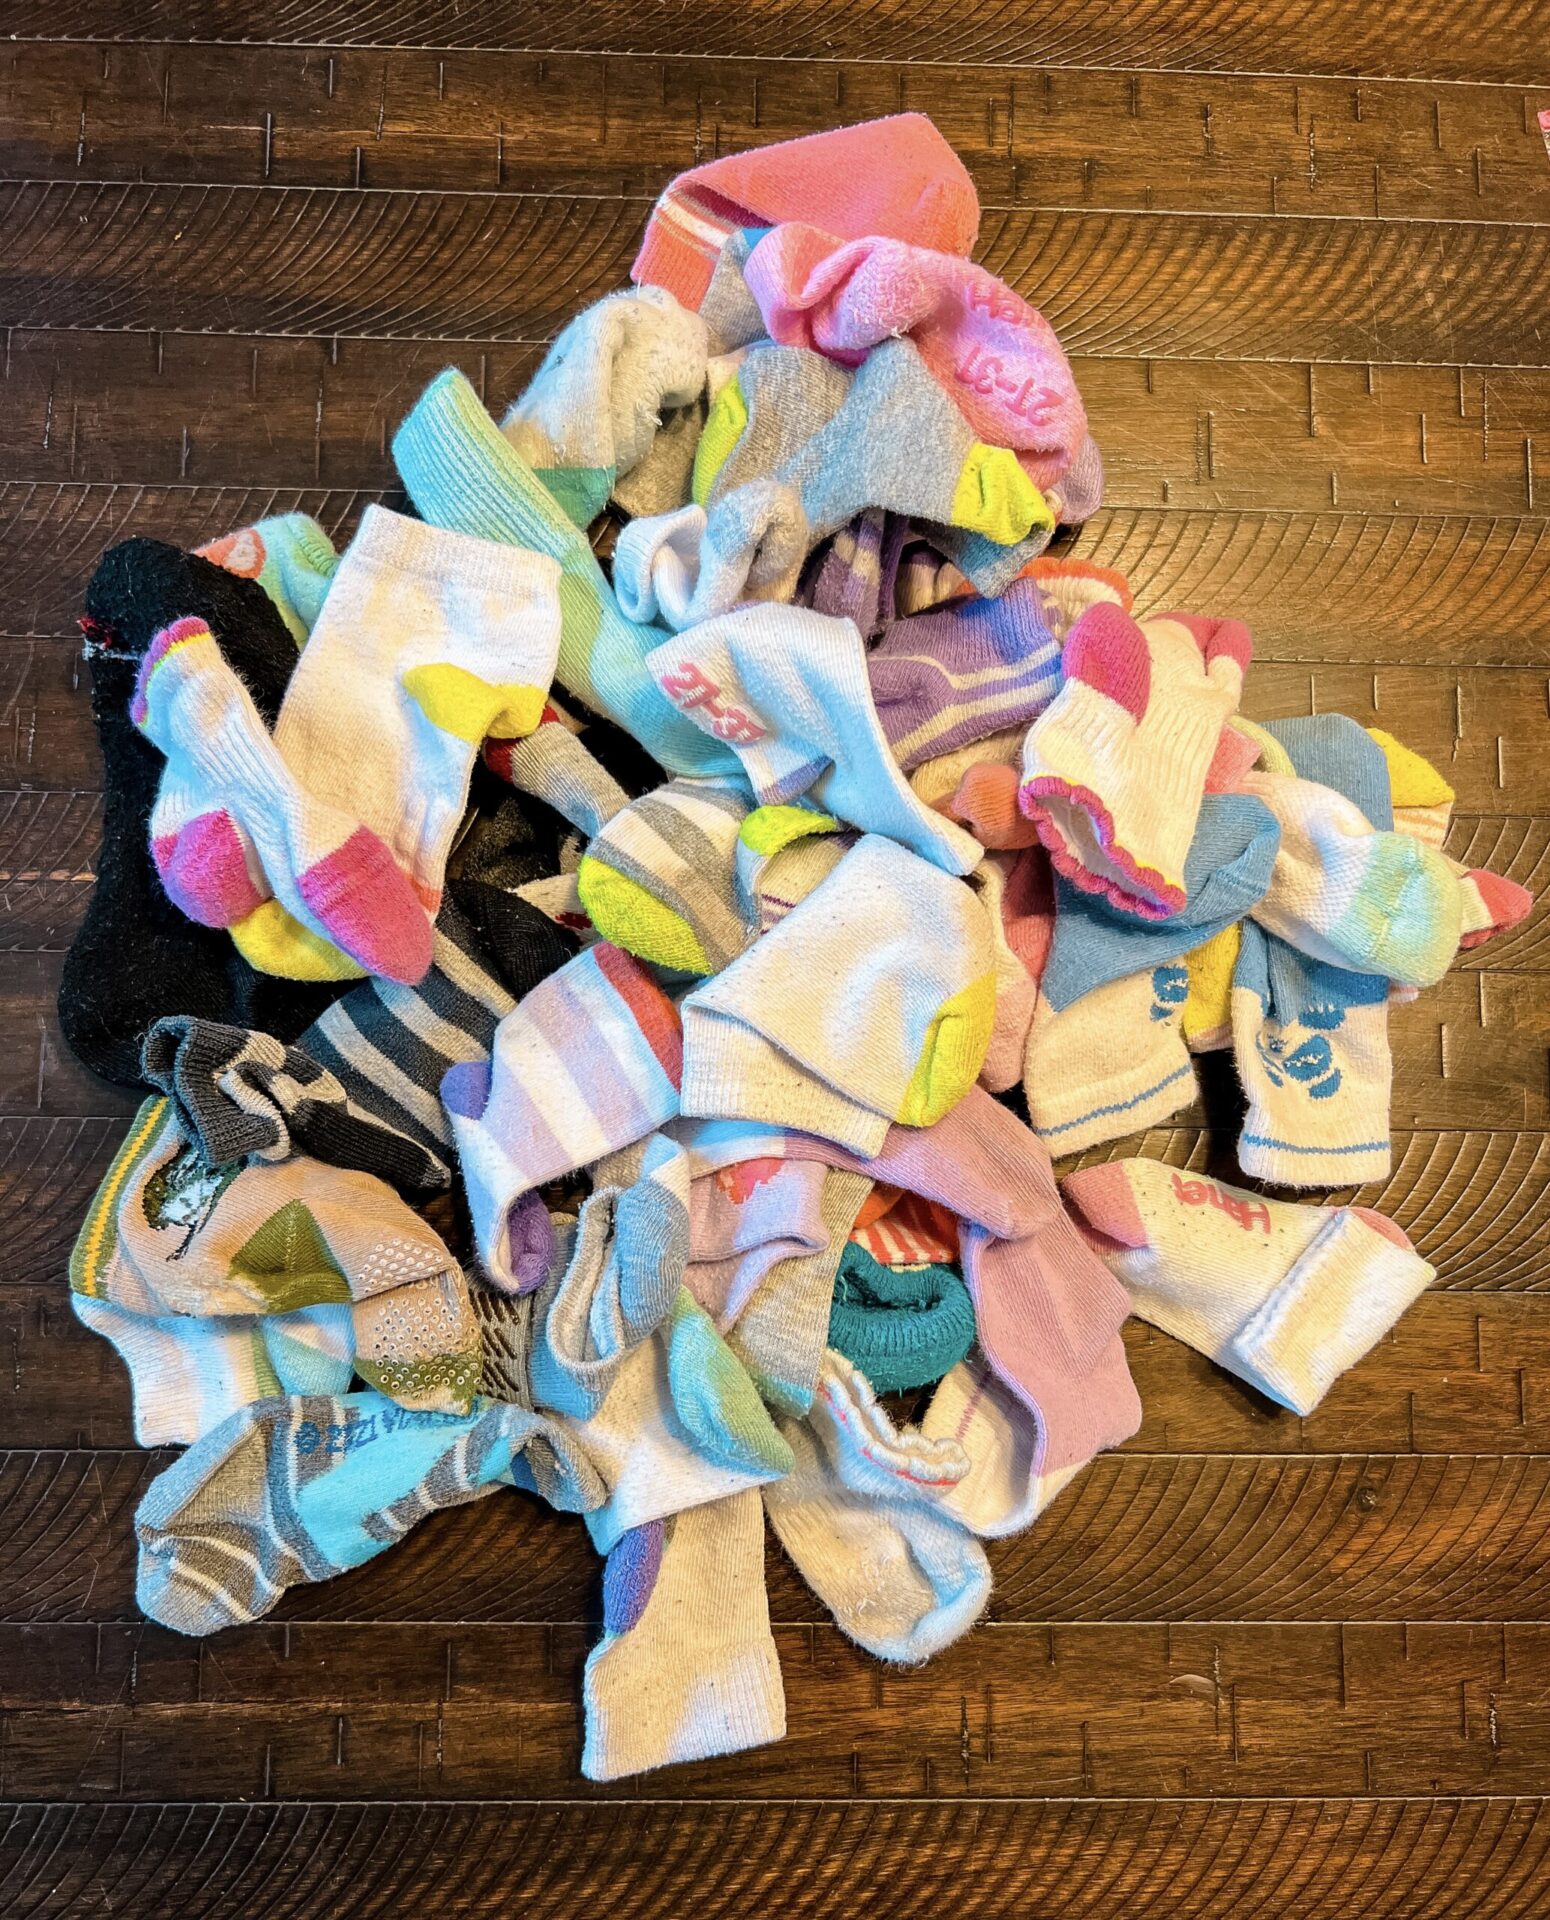 Pile of mismatched socks to make DIY knee pads for babies and toddlers.